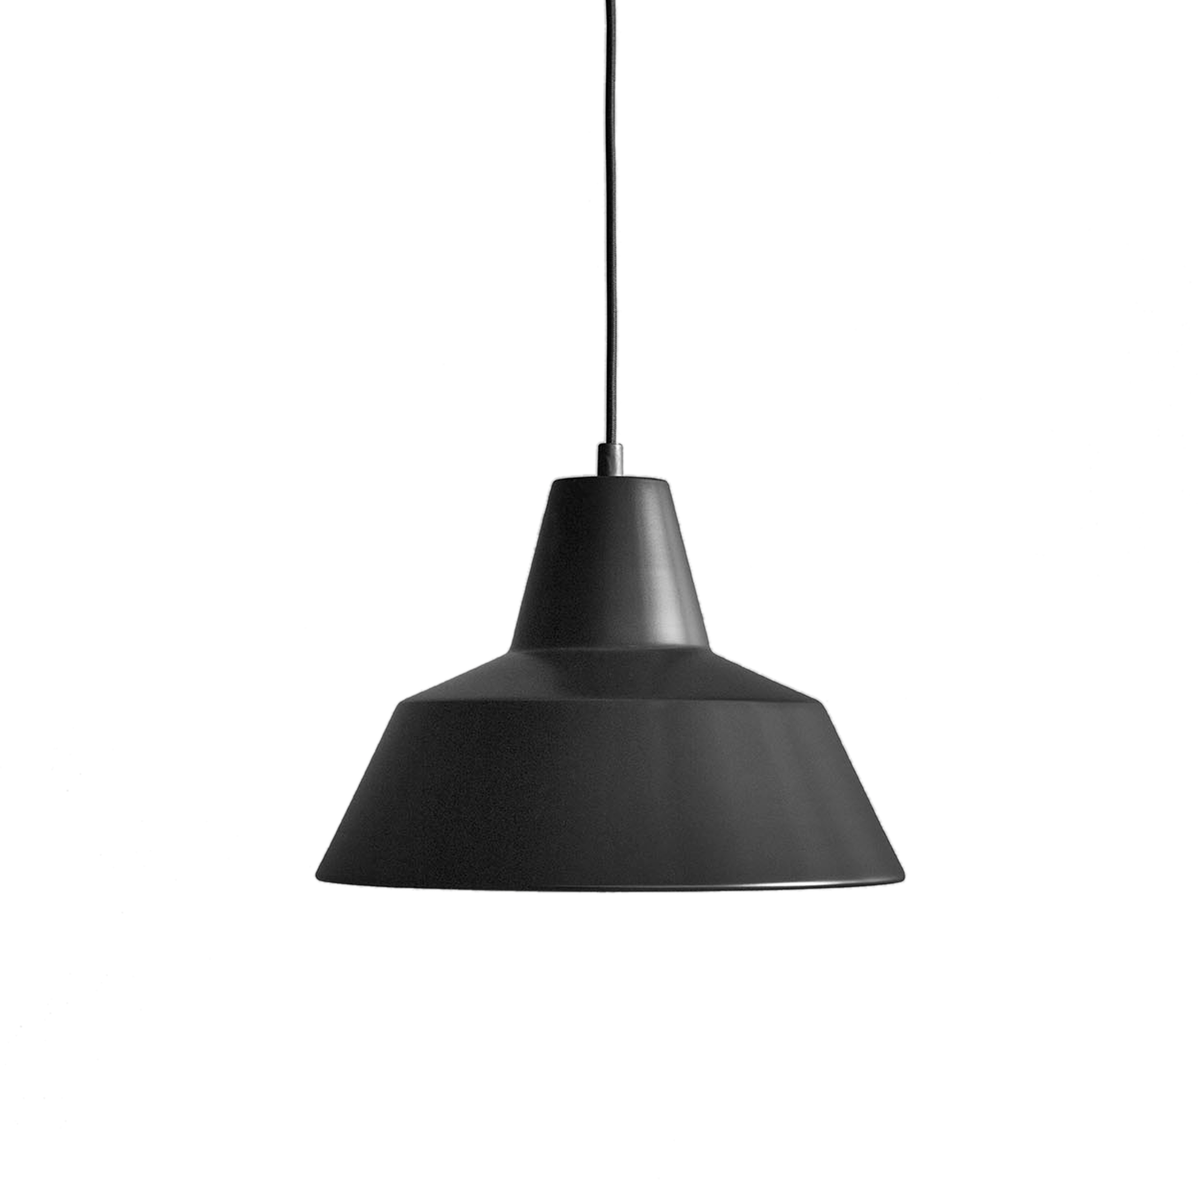 Made by Hand, Workshop Pendant W3, Matte Black